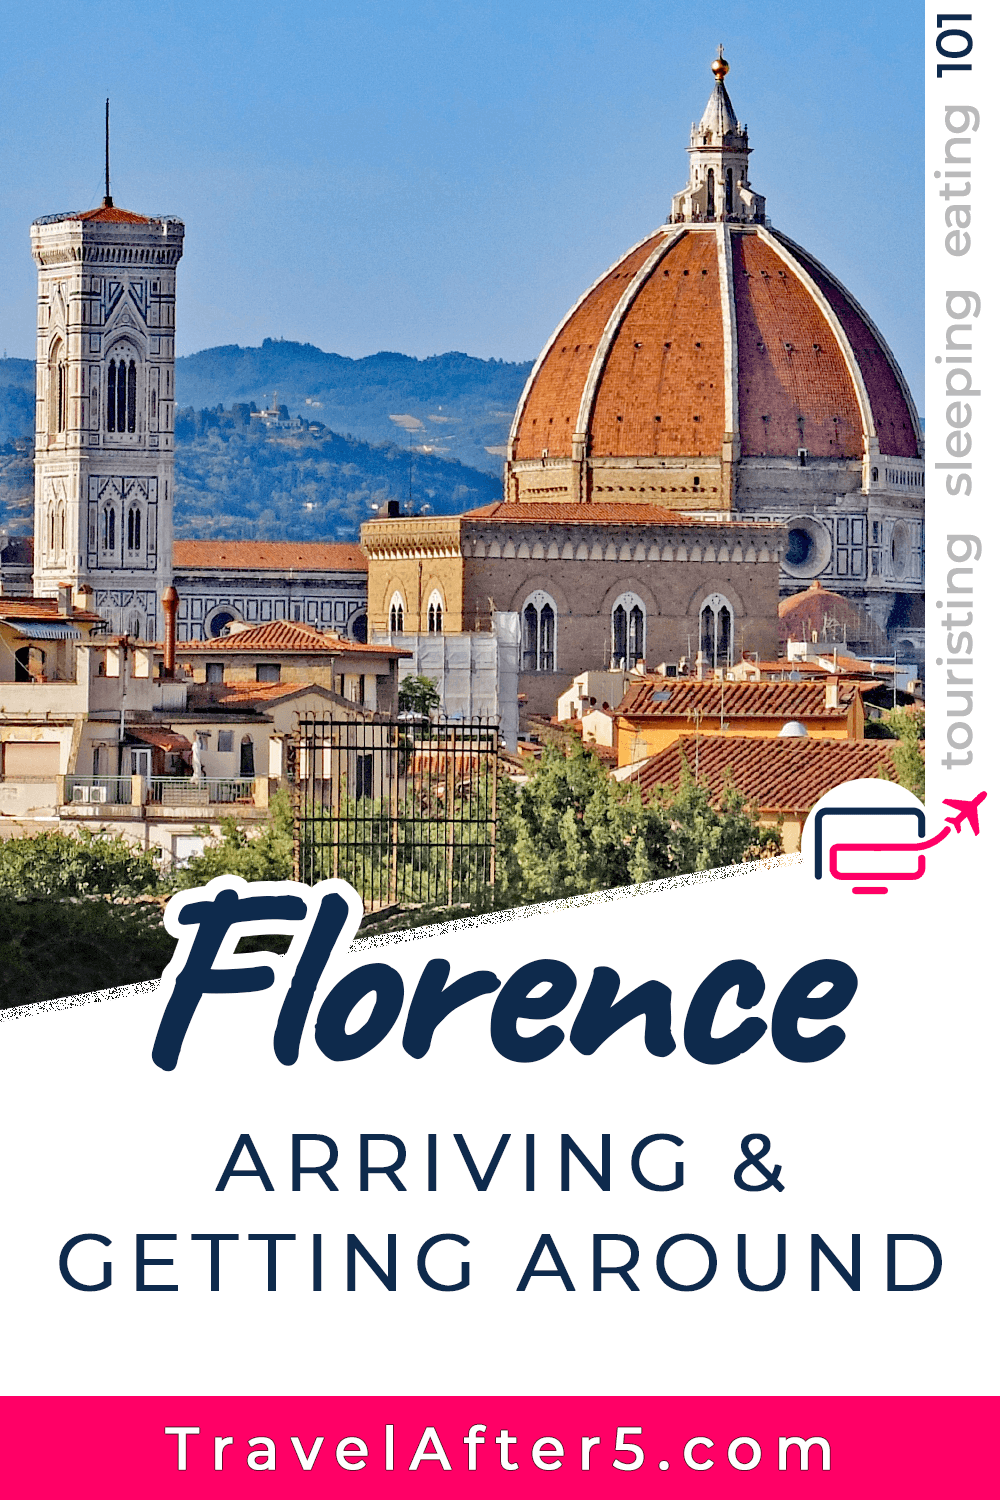 Pinterest Pin to Florence 101, Arriving & Getting Around, by Travel After 5